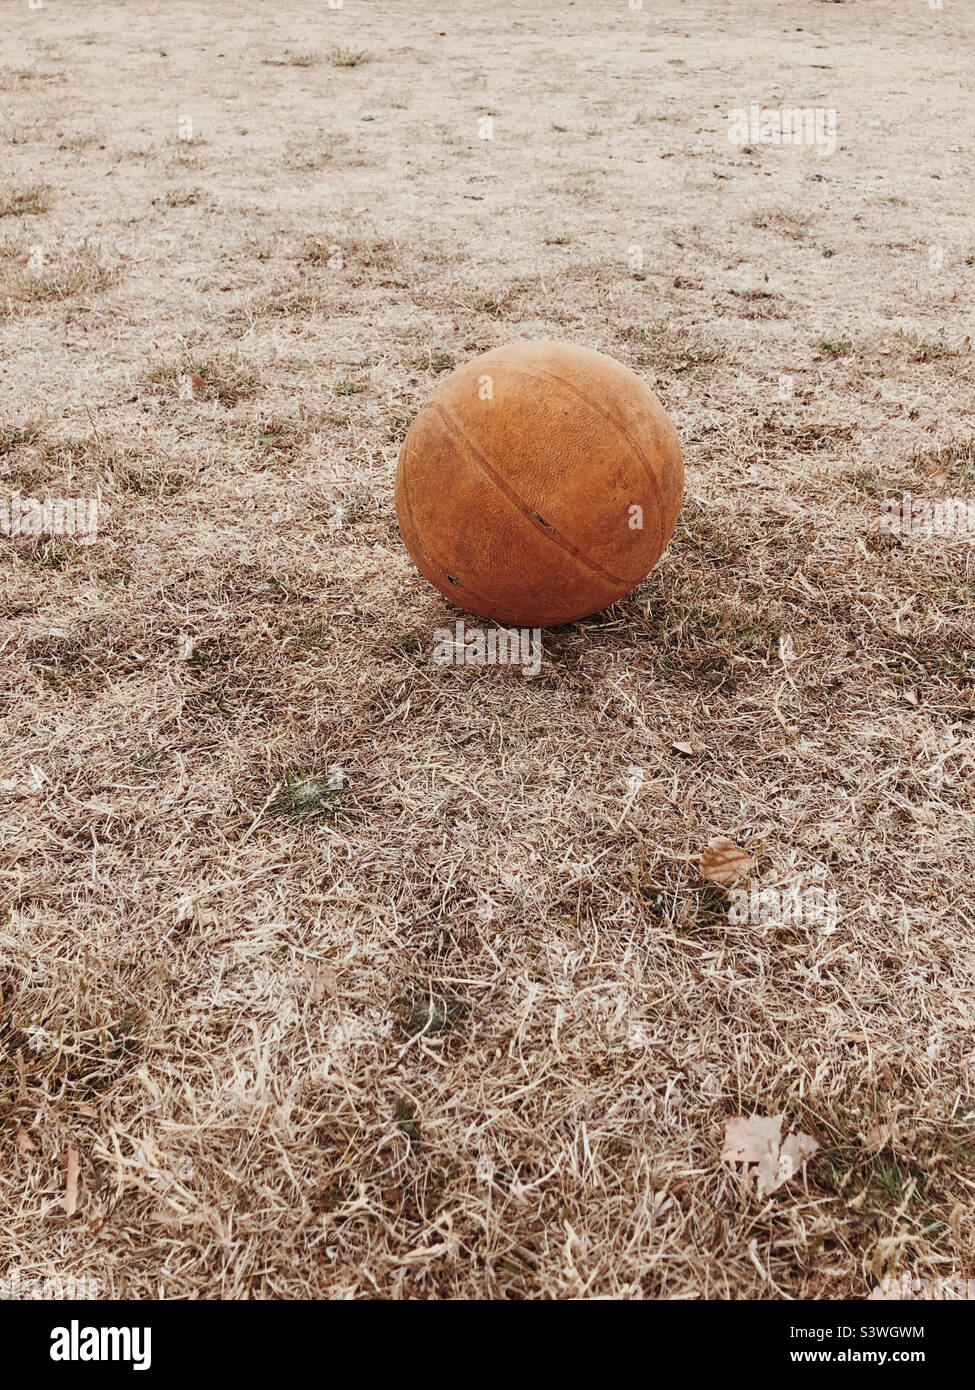 Basketball on parched grass Stock Photo